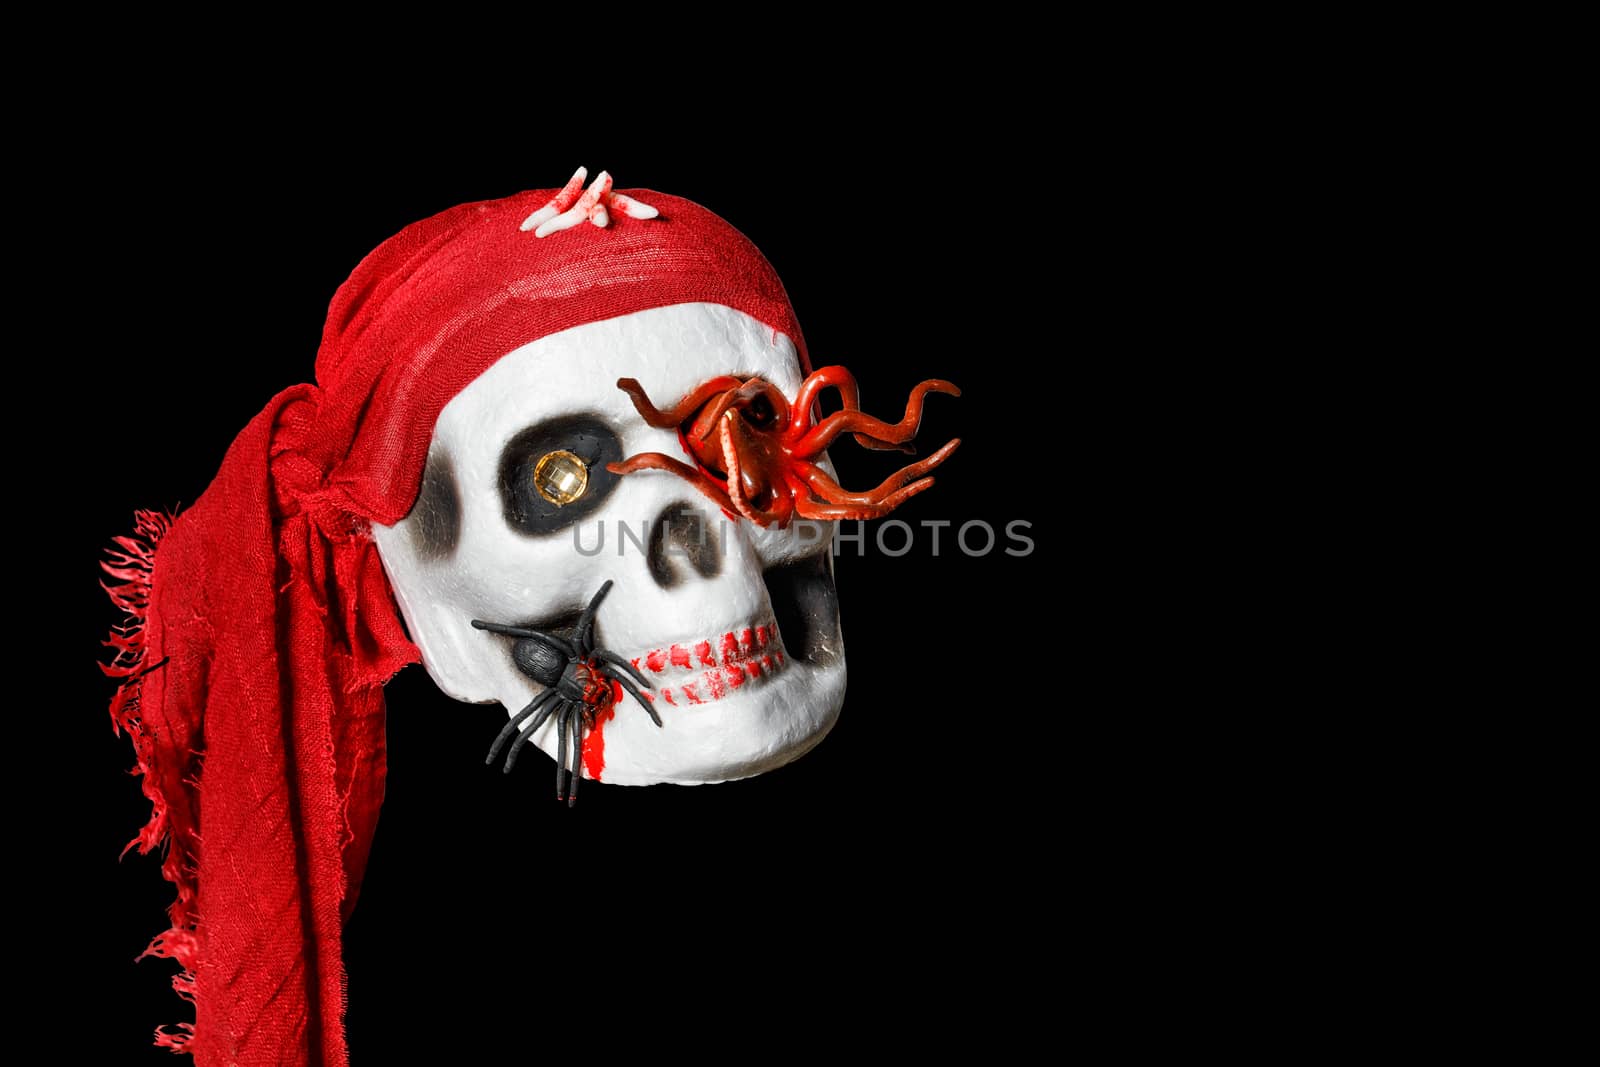 Halloween, skull doll in a red bandana and an octopus in the eye socket and a spider on the cheekbone, isolated on a black background. by Sergii